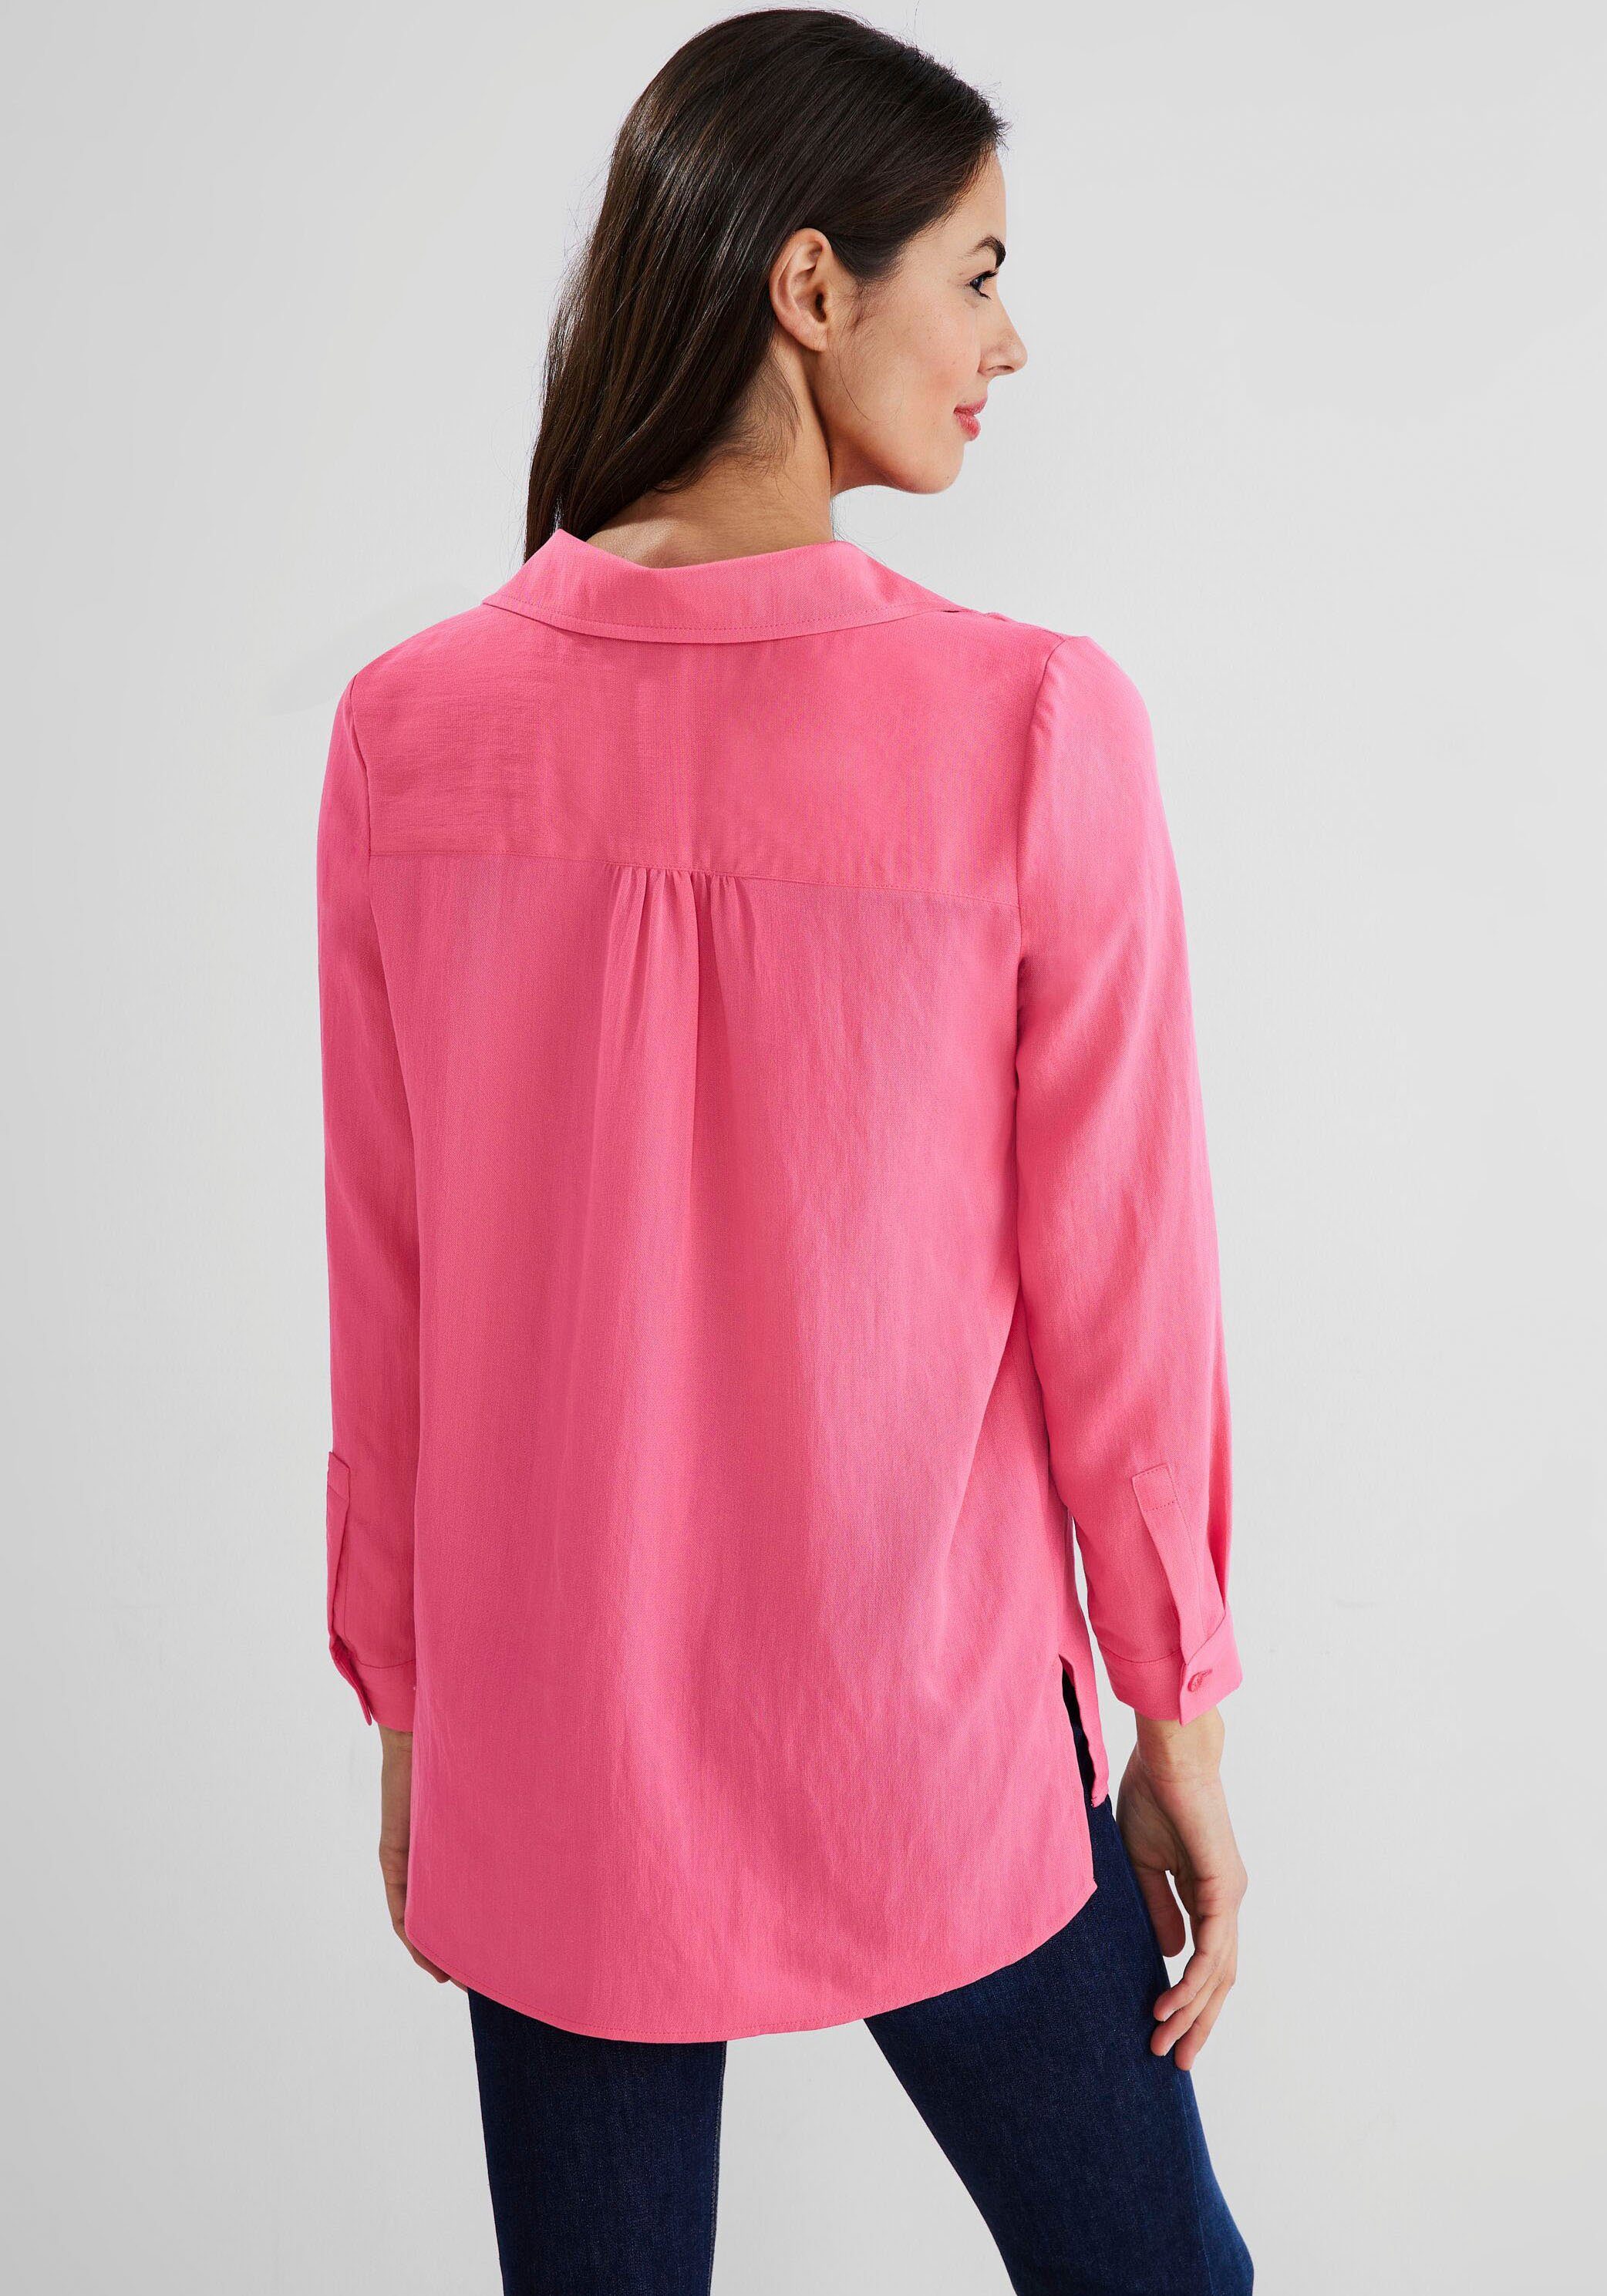 STREET ONE Longbluse in Silhouette vorteilhafter